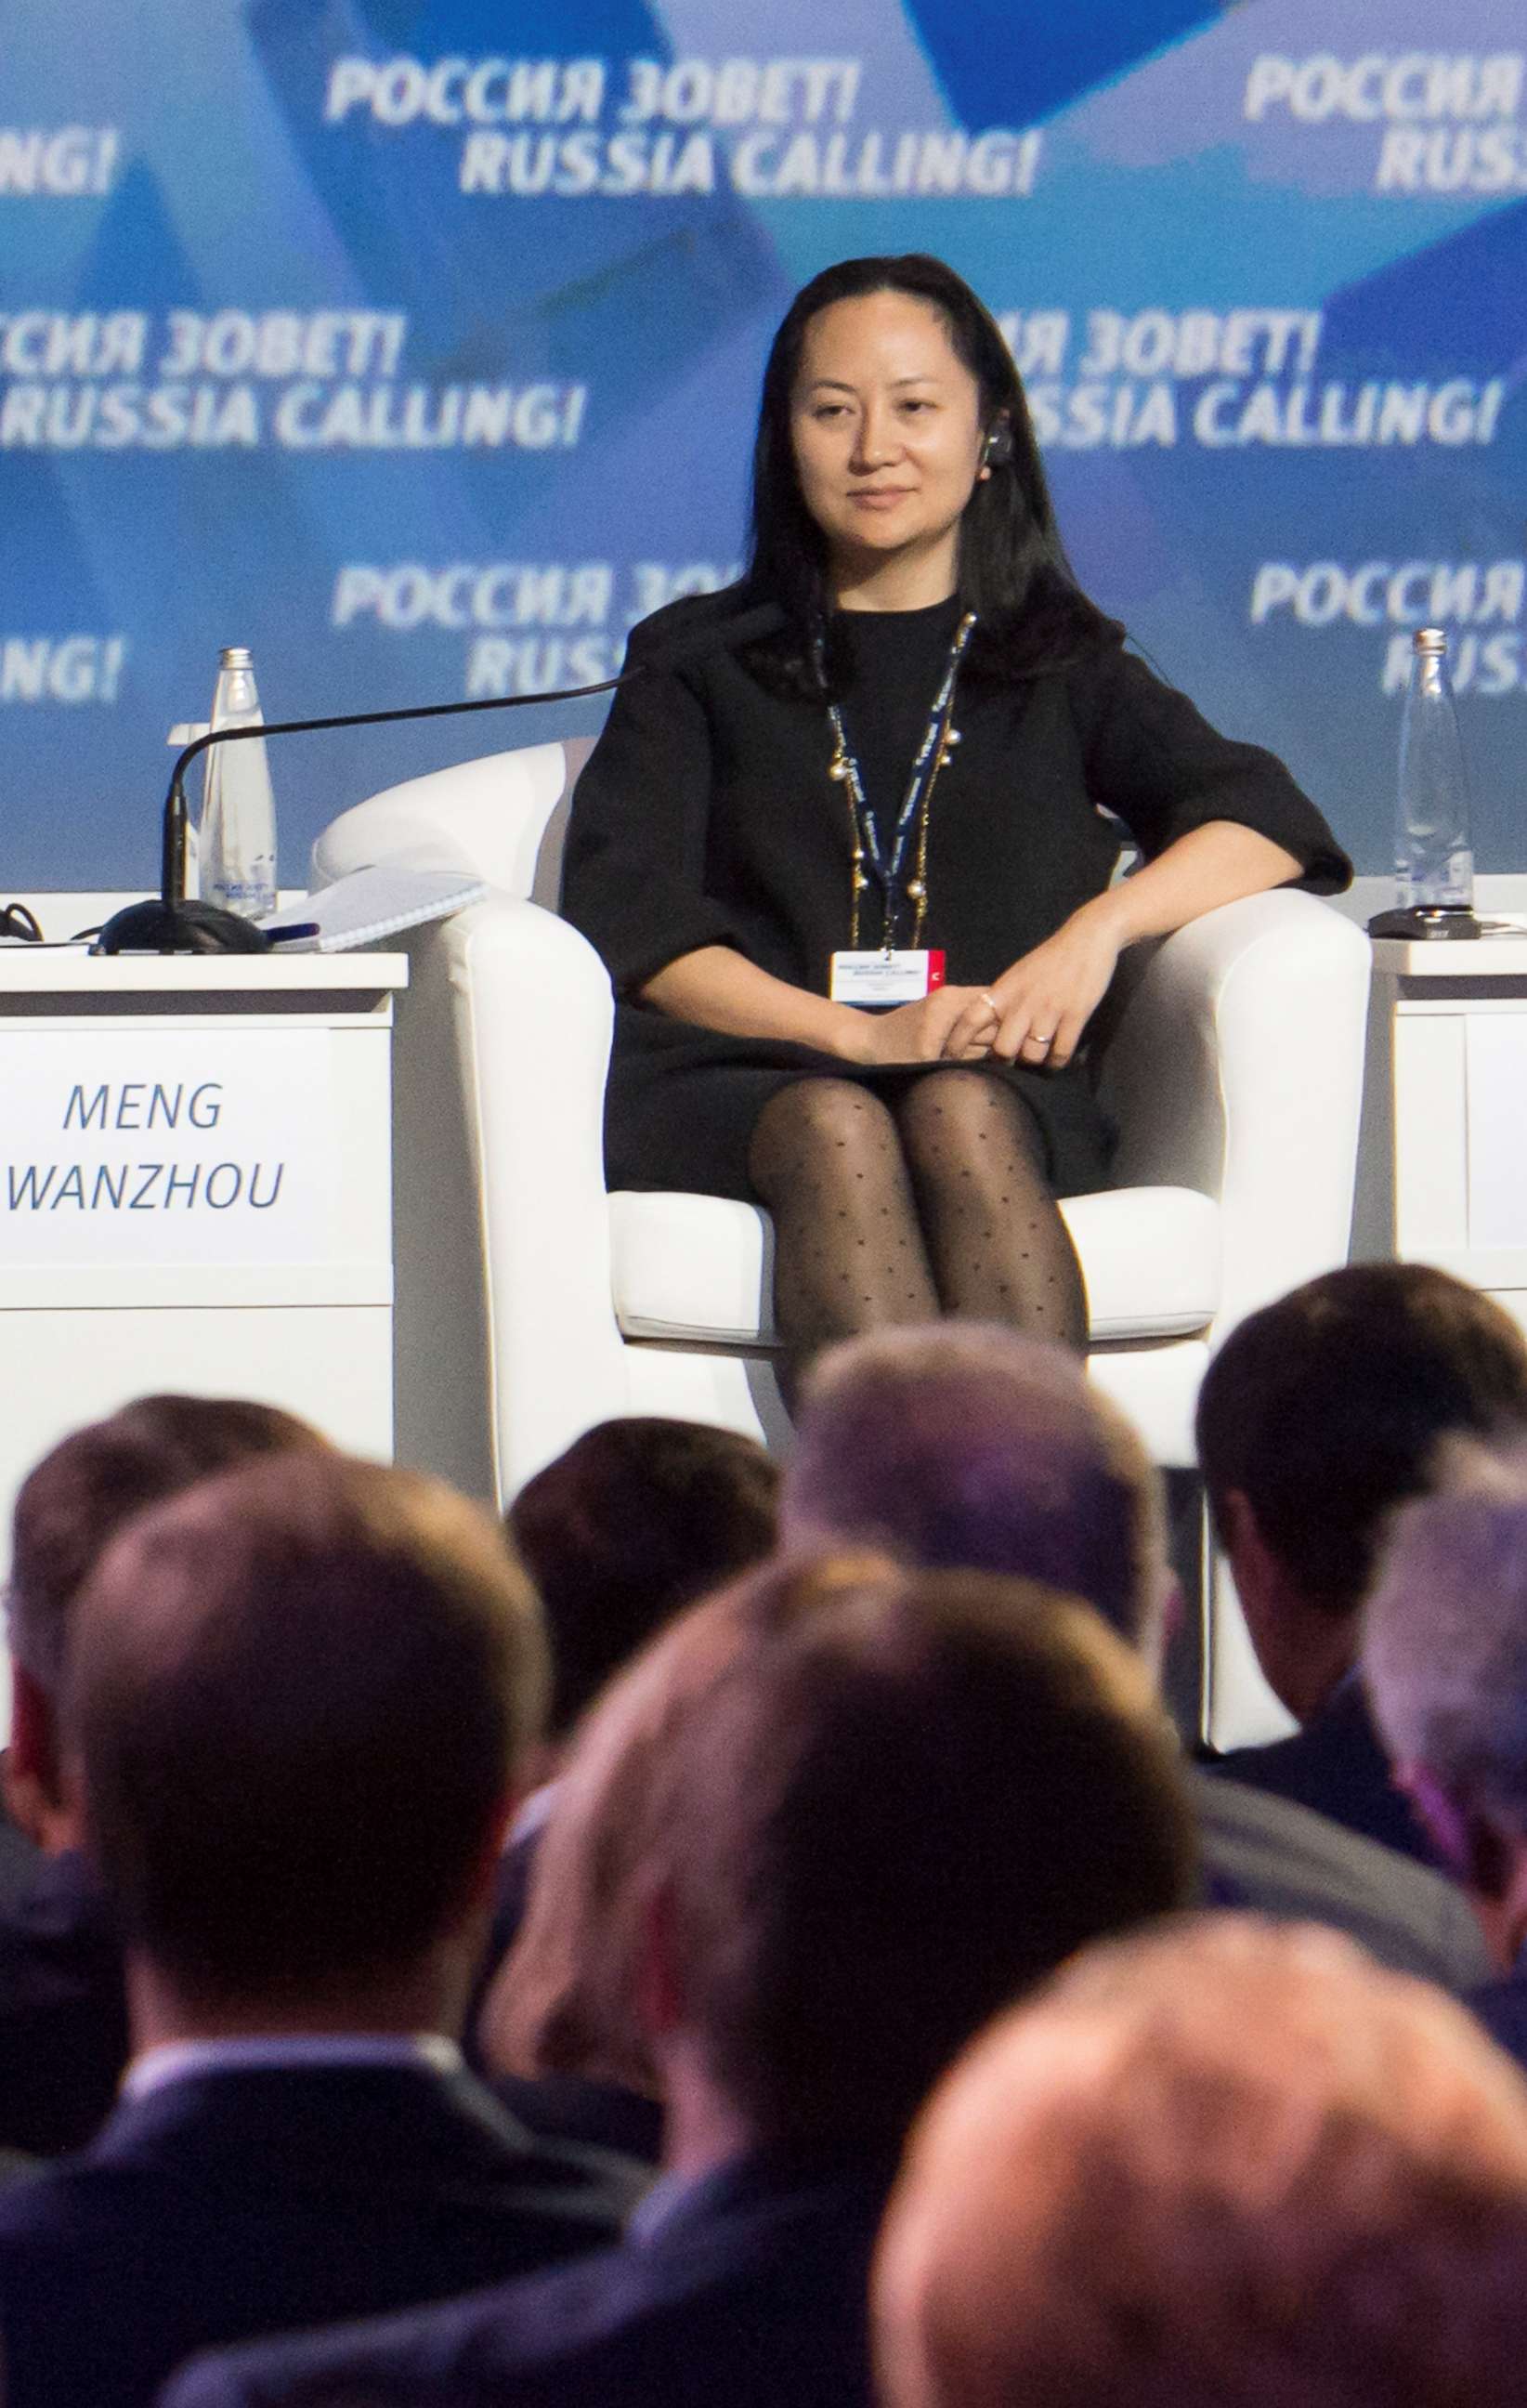 PHOTO: Meng Wanzhou, Executive Board Director of the Chinese technology giant Huawei, attends a session of the VTB Capital Investment Forum "Russia Calling!" in Moscow, Oct. 2, 2014.